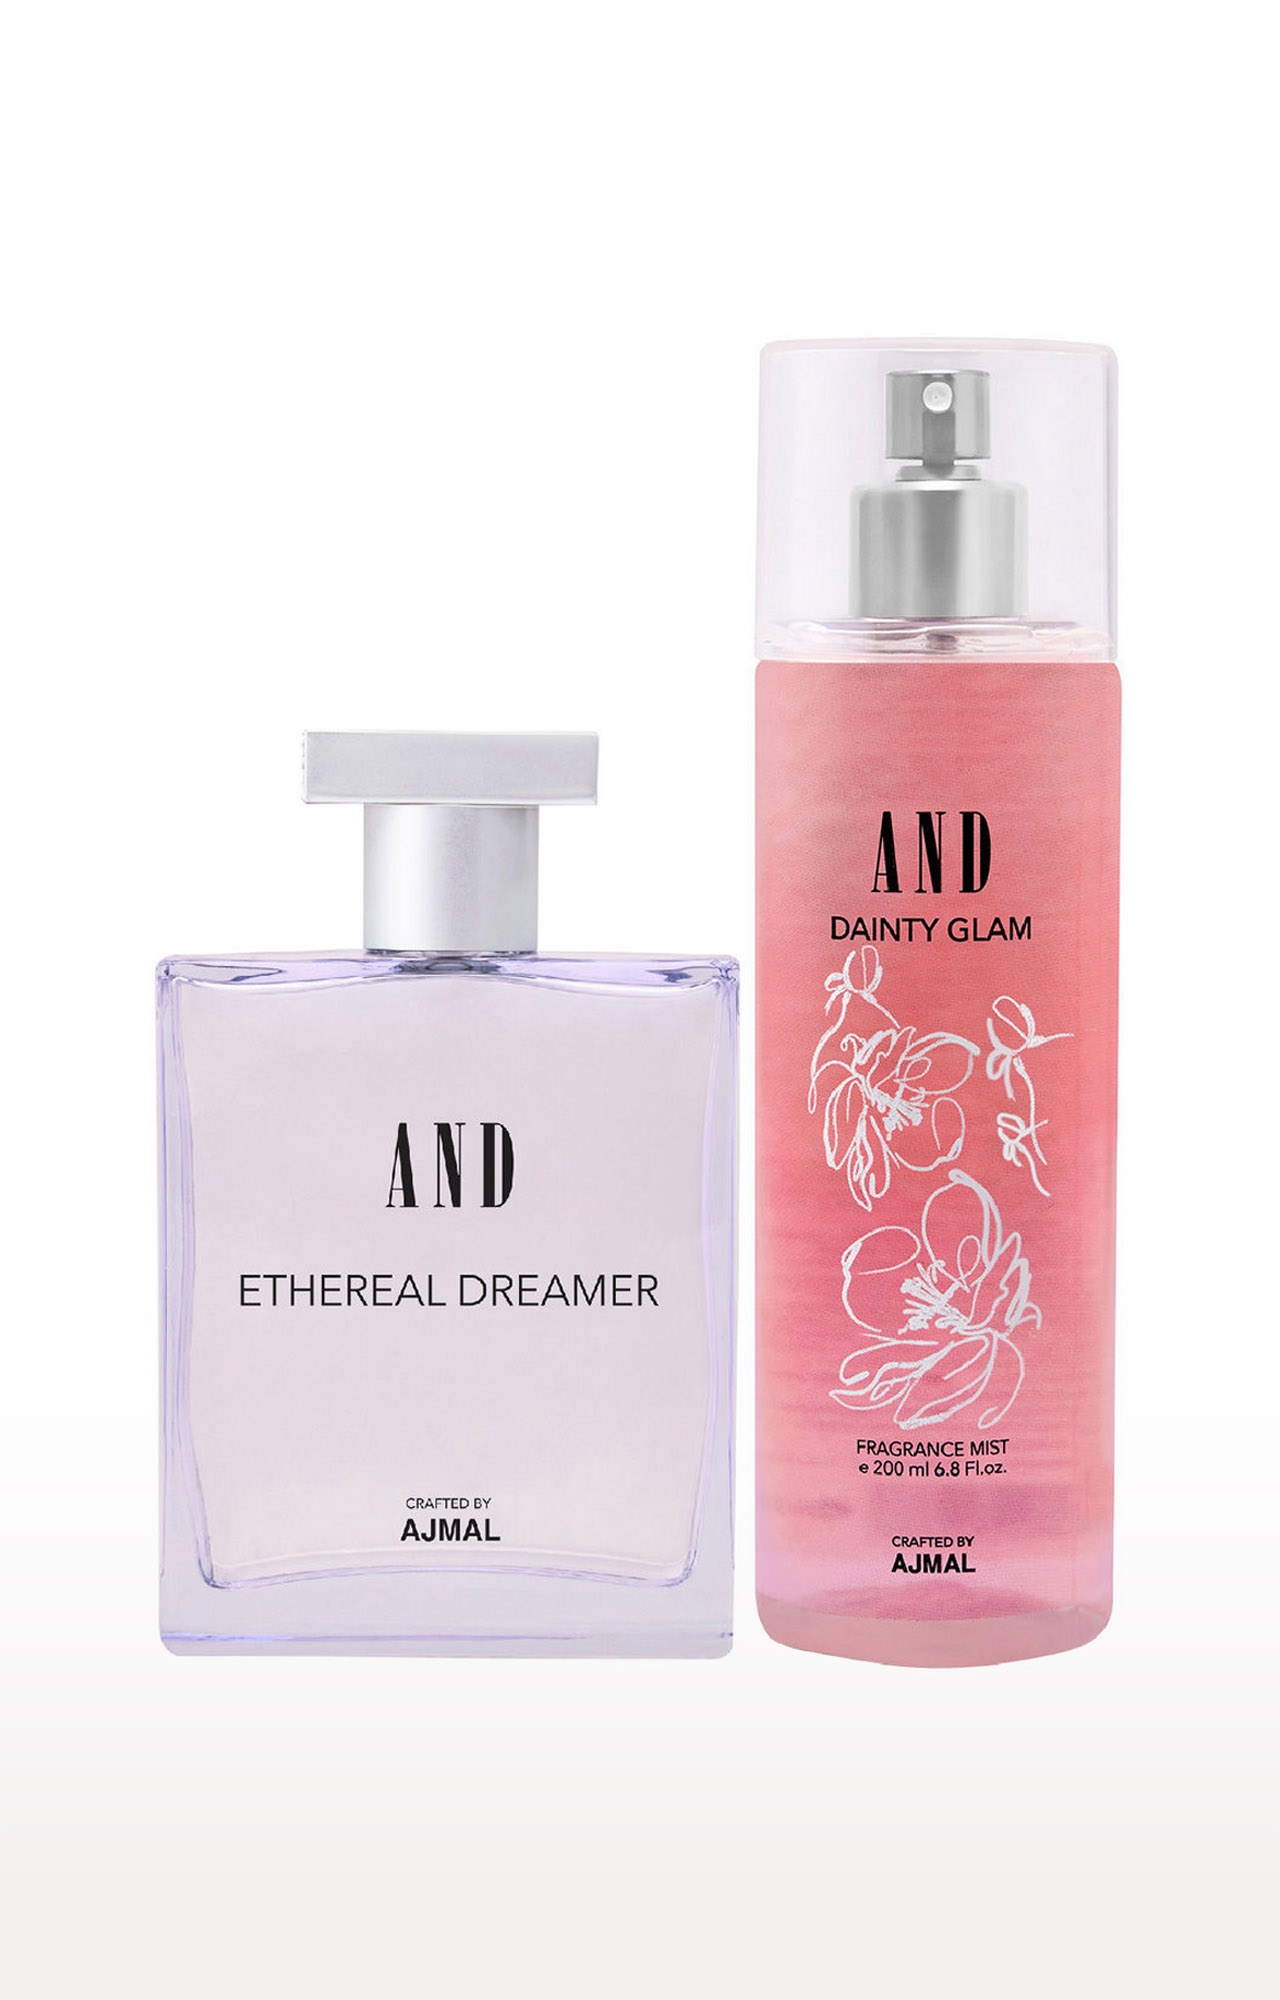 AND Crafted By Ajmal | AND Ethereal Dreamer EDP 100ML & Dainty Glam Body Mist 200ML Pack of 2 for Women Crafted by Ajmal + 2 Parfum Testers